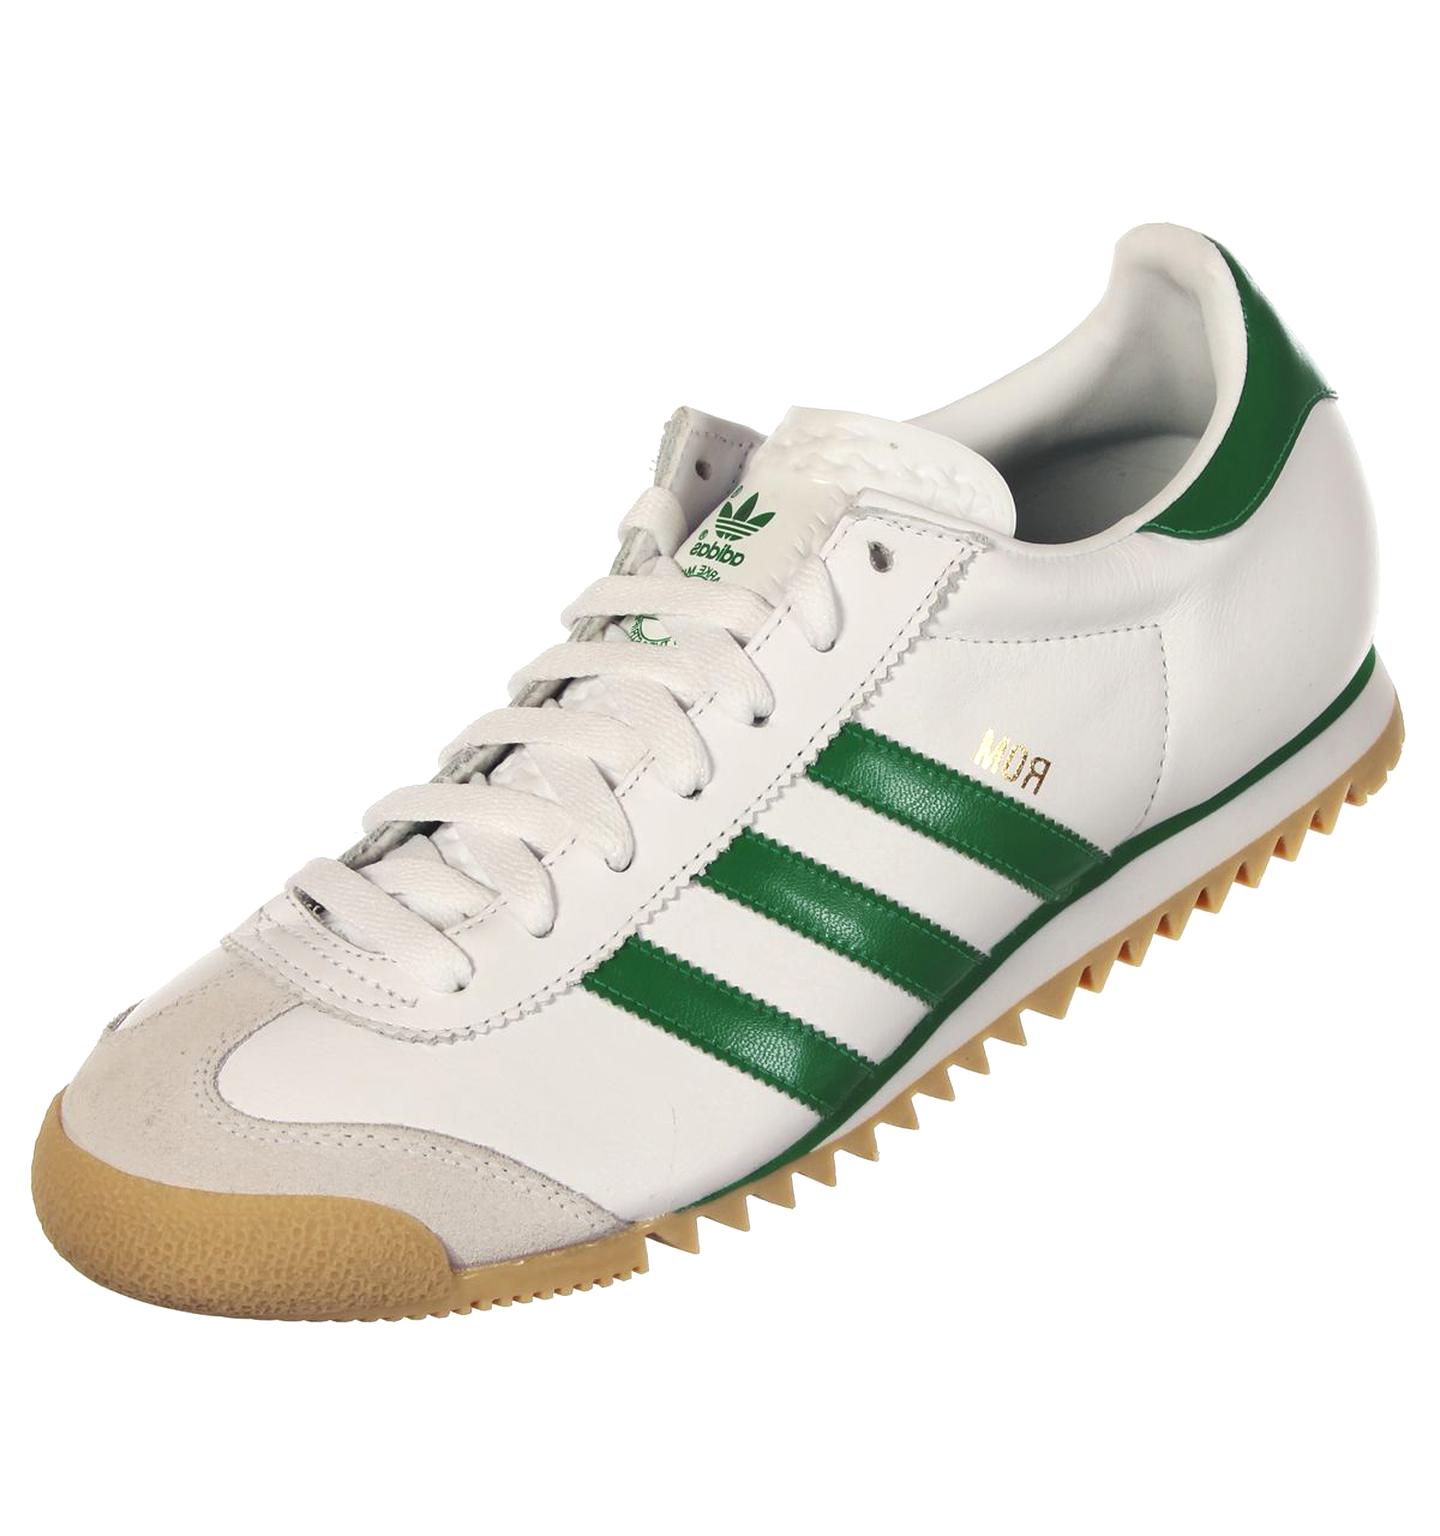 Adidas Trainers Retro for sale in UK | 79 used Adidas Trainers Retros